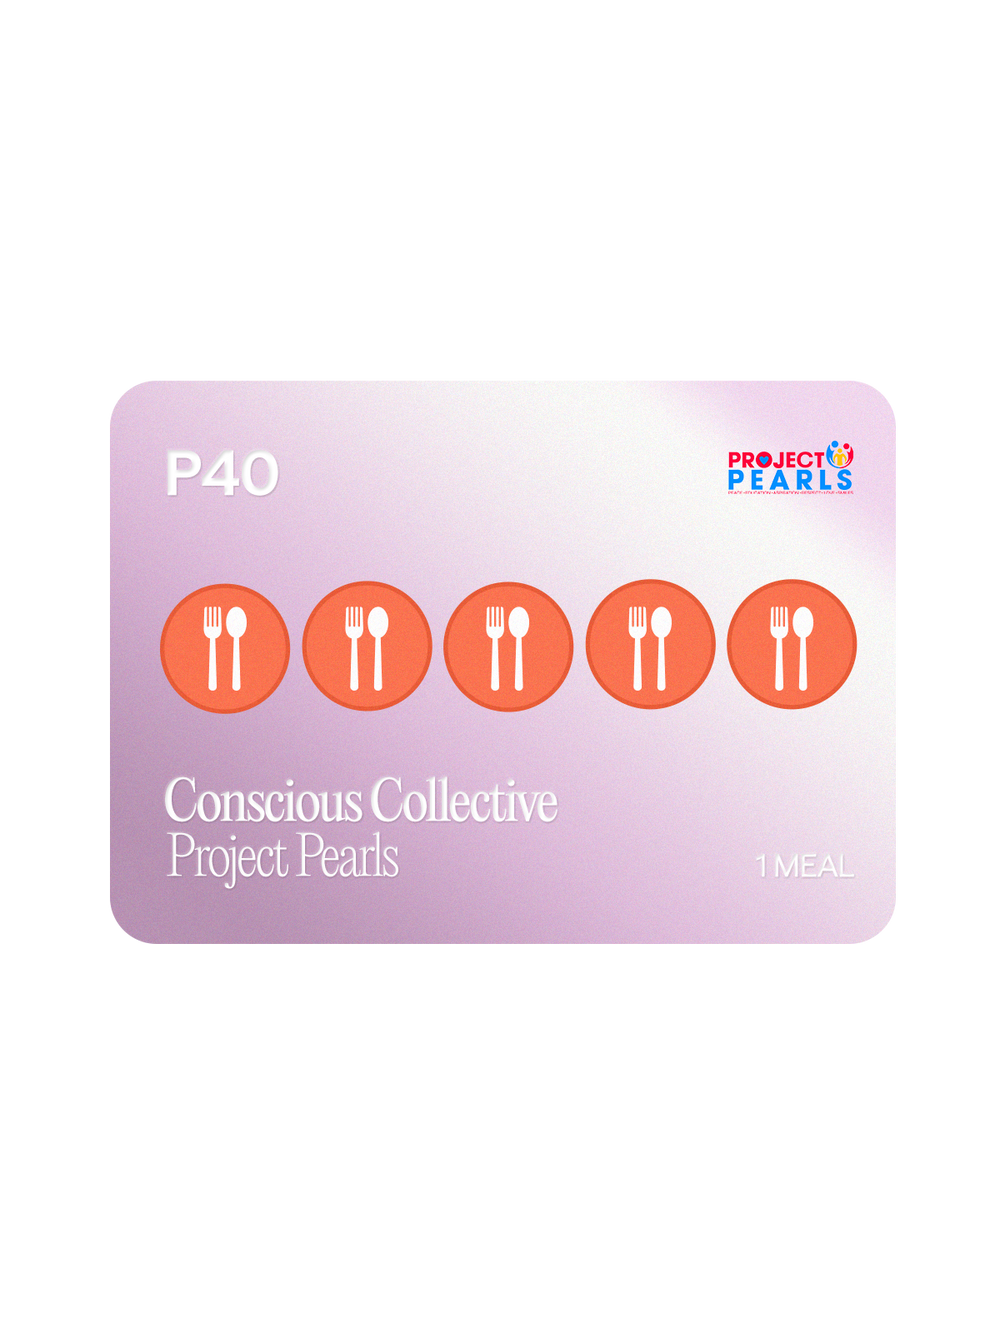 Project Pearls Donation - The Collective